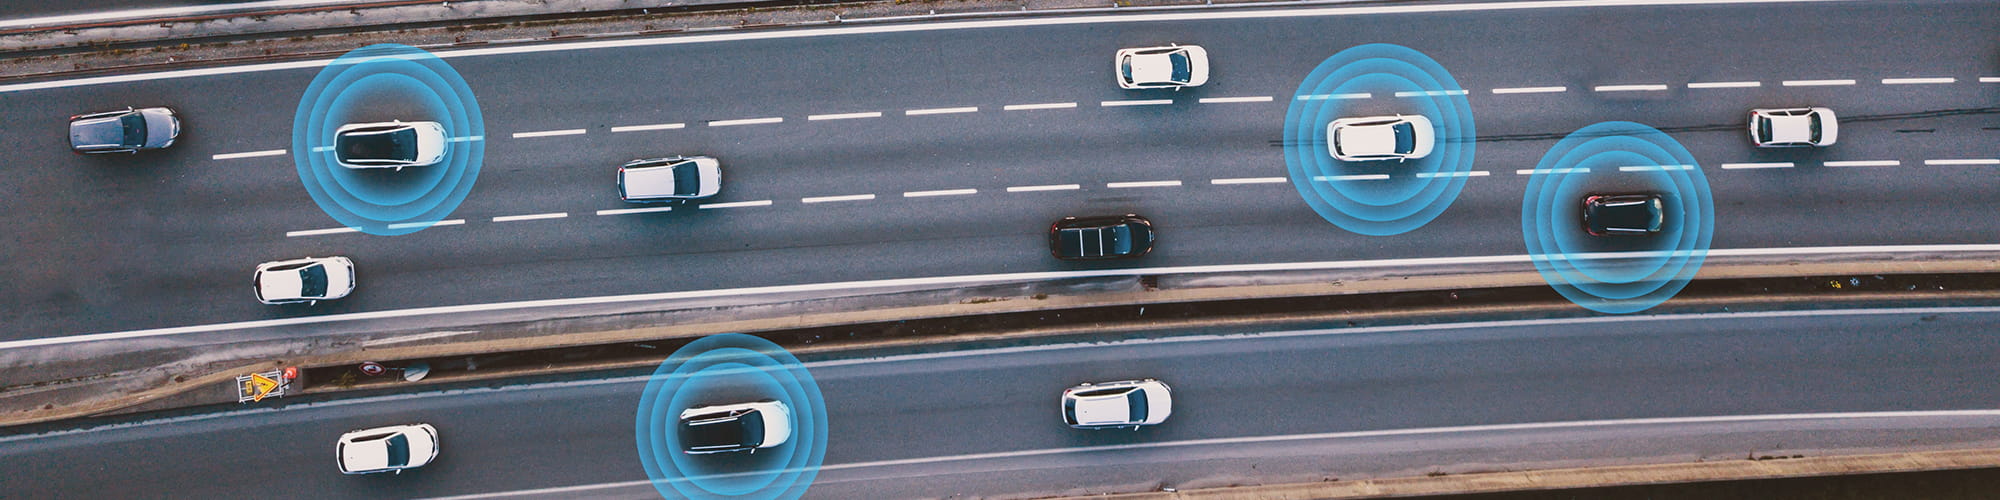 smart cars driving on the road driverless vehicles aerial top view from above 